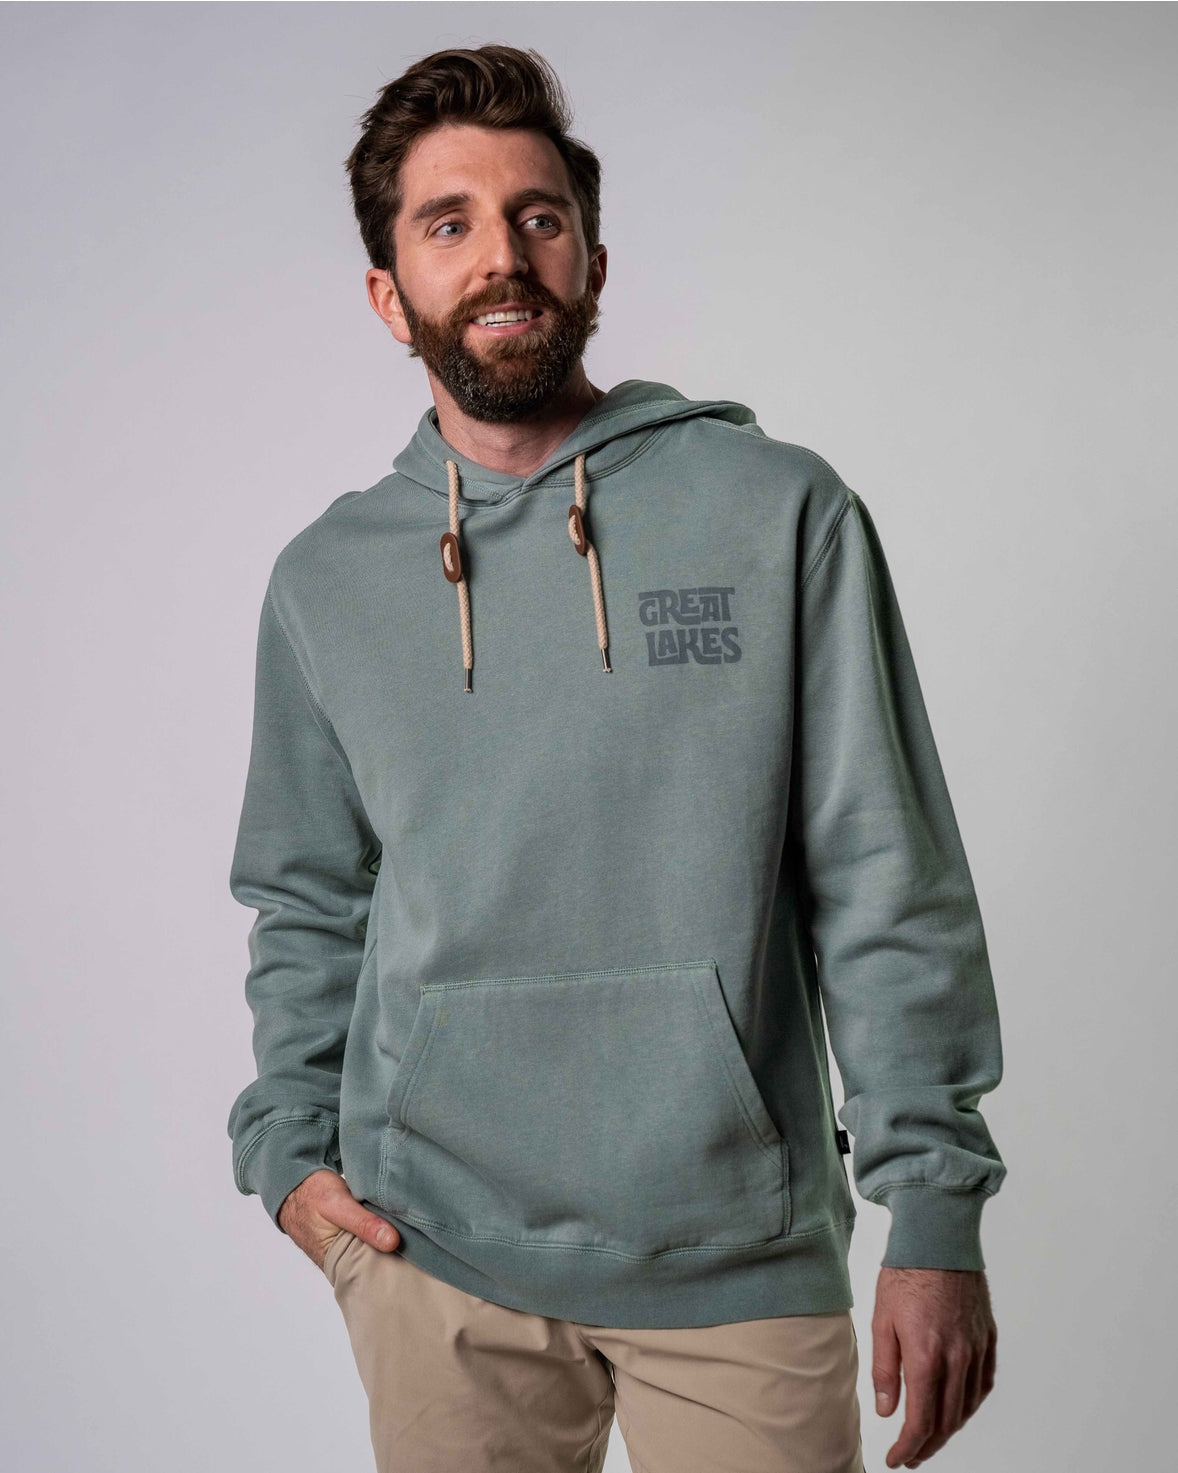 Solstice Hoodie - Storm and Sky Shoppe - Great Lakes